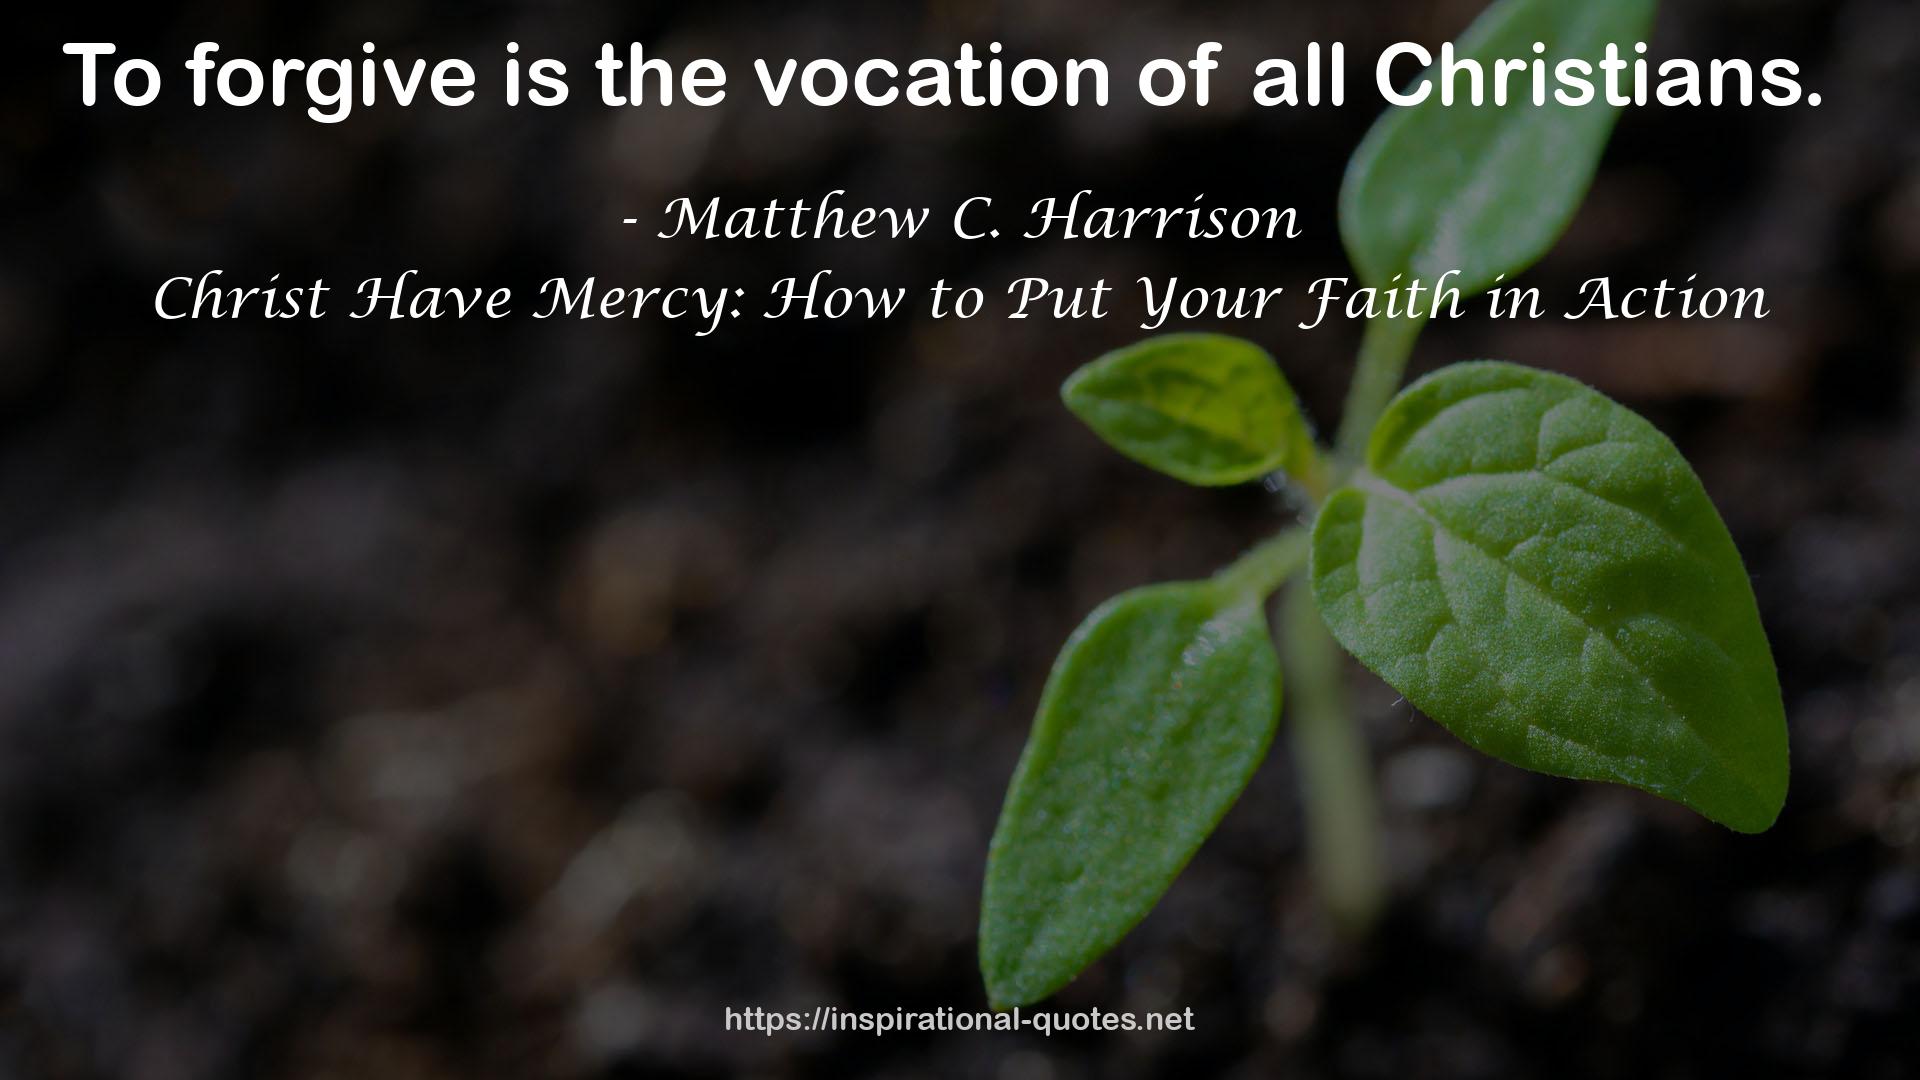 Christ Have Mercy: How to Put Your Faith in Action QUOTES